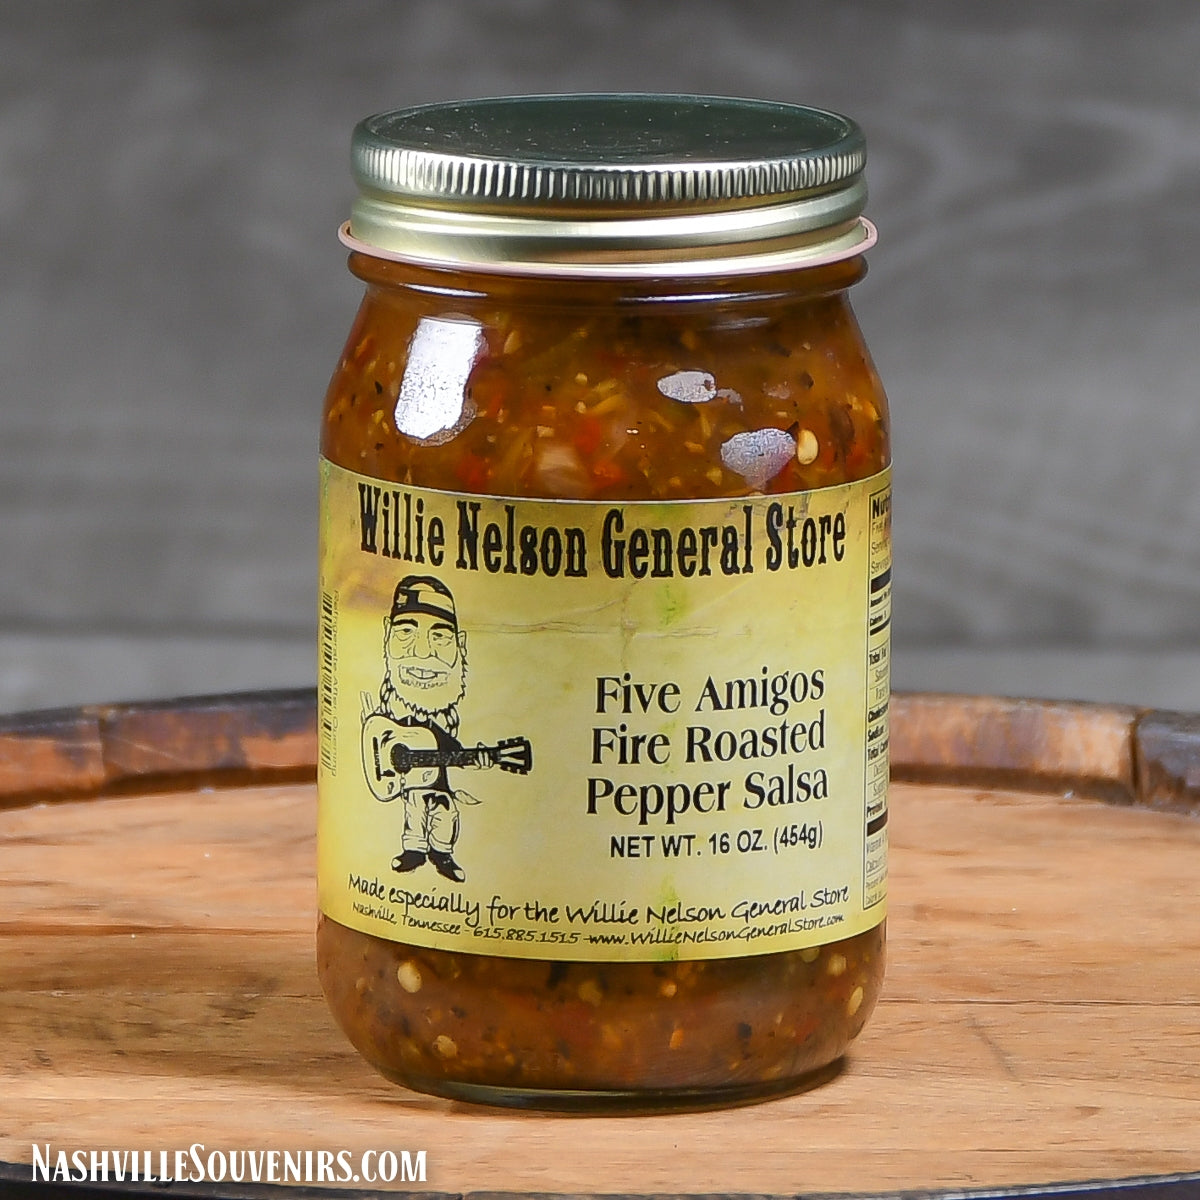 Willie Nelson General Store Five Amigos Fire Roasted Pepper Salsa